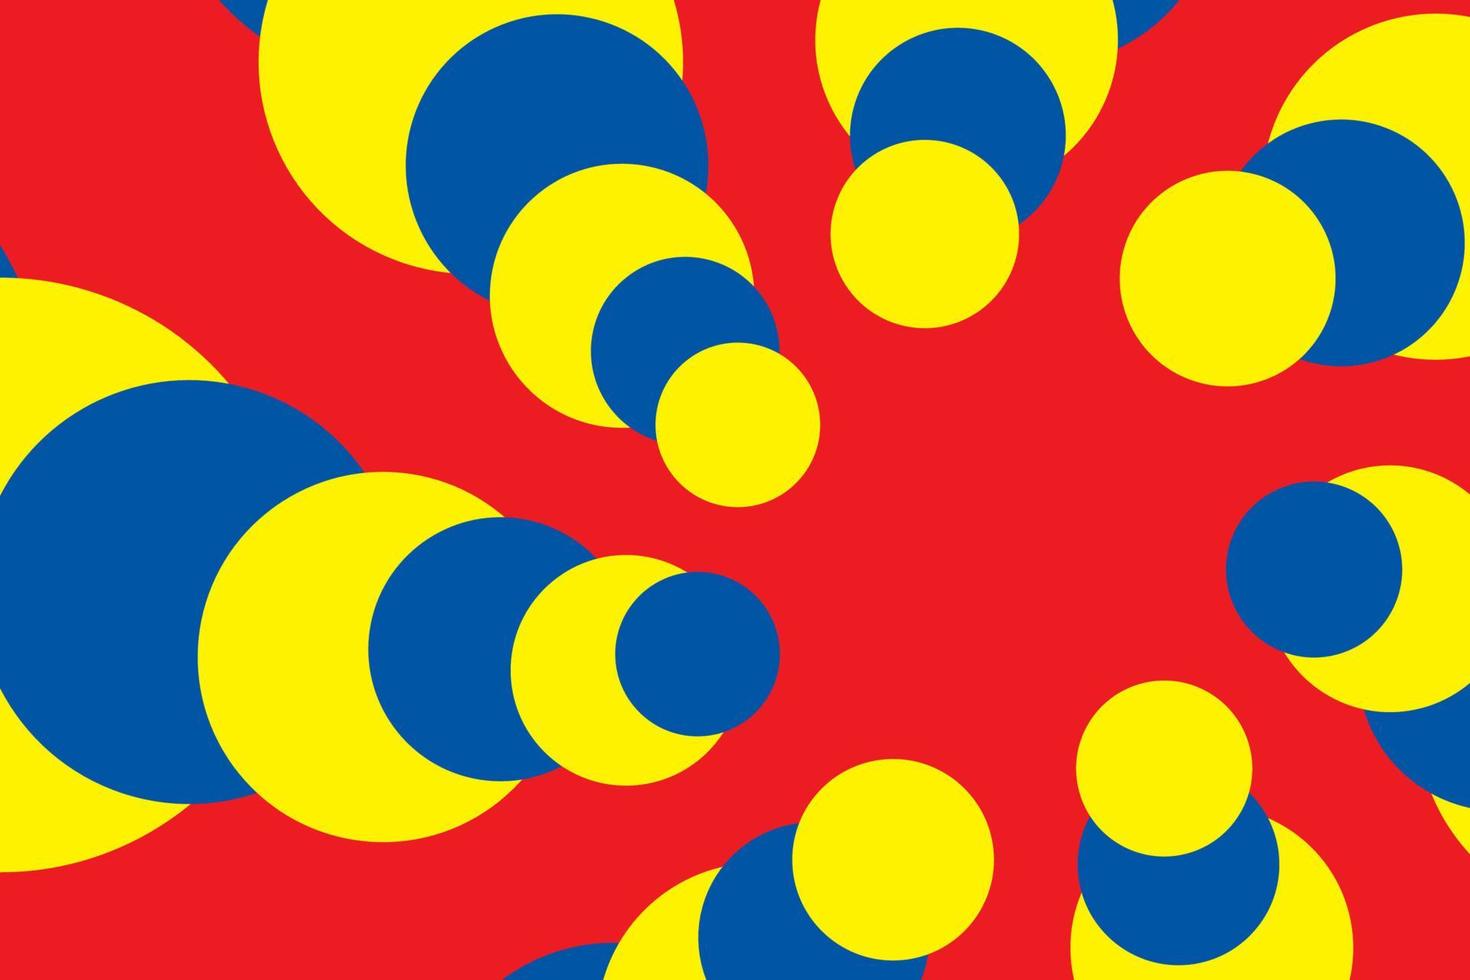 Primary colors background, blue, red, and yellow, geometric circle shape. Vector illustration.